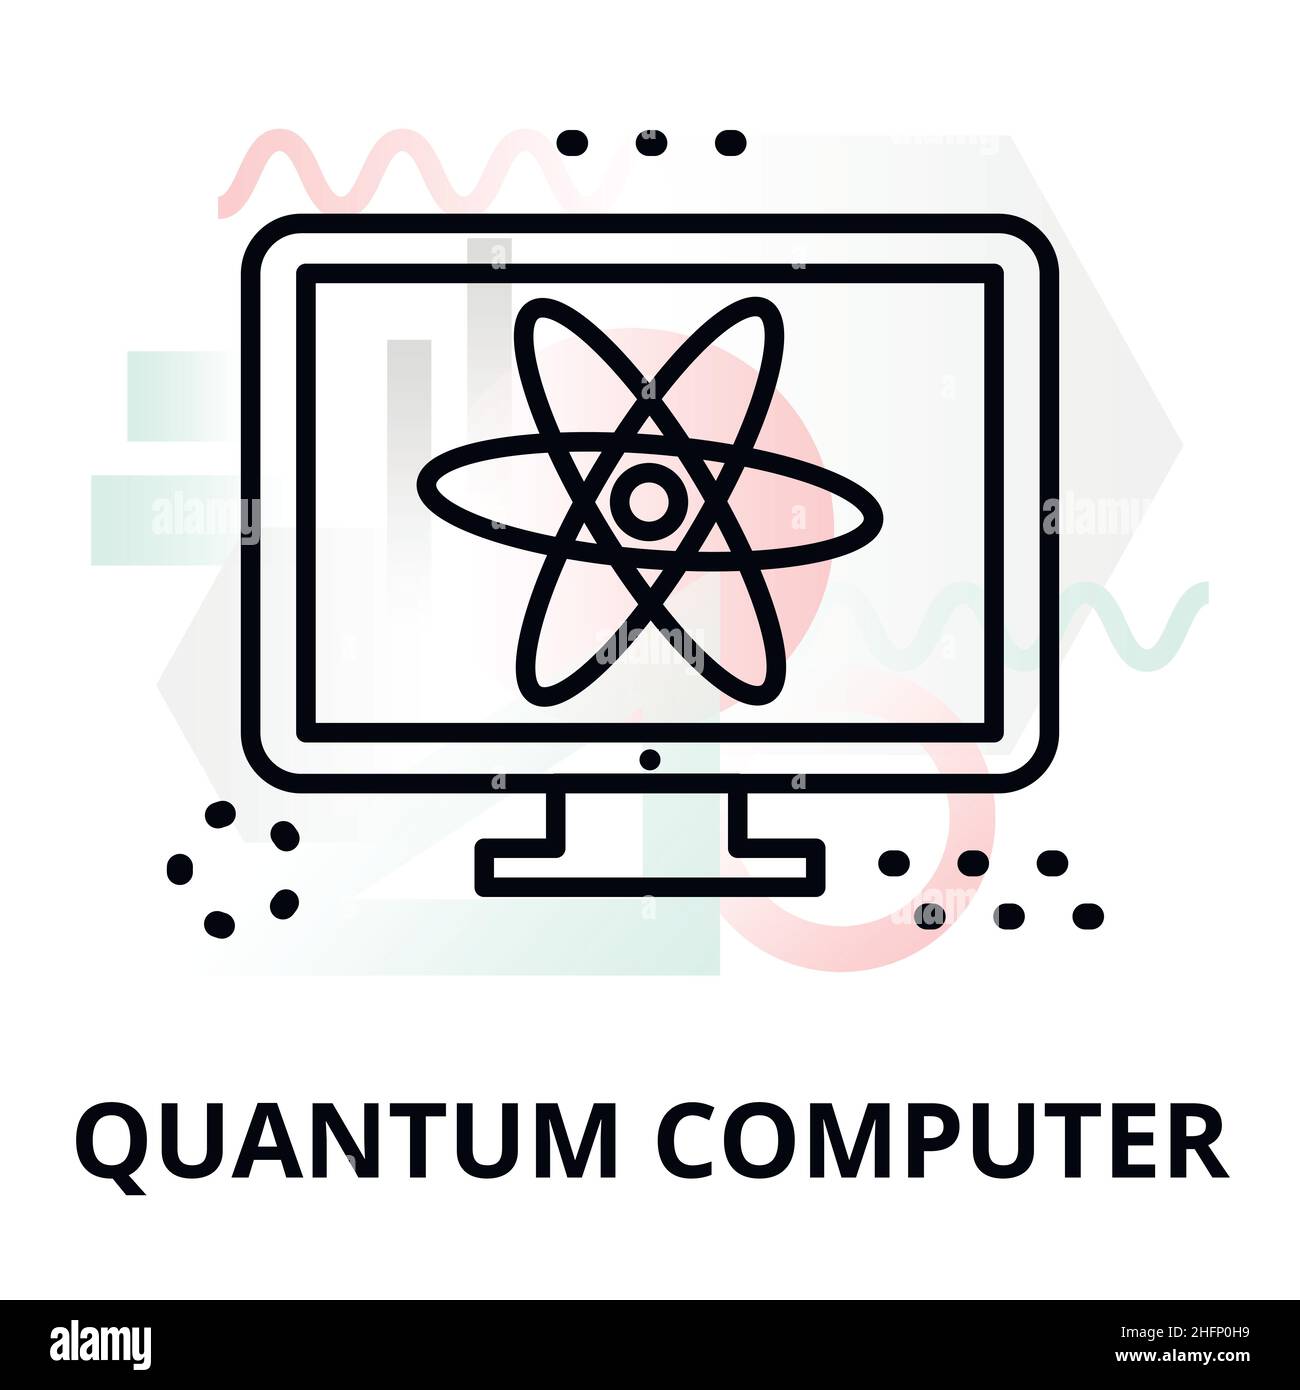 Abstract icon of future technology - quantum computer on color geometric shapes background, for graphic and web design Stock Vector